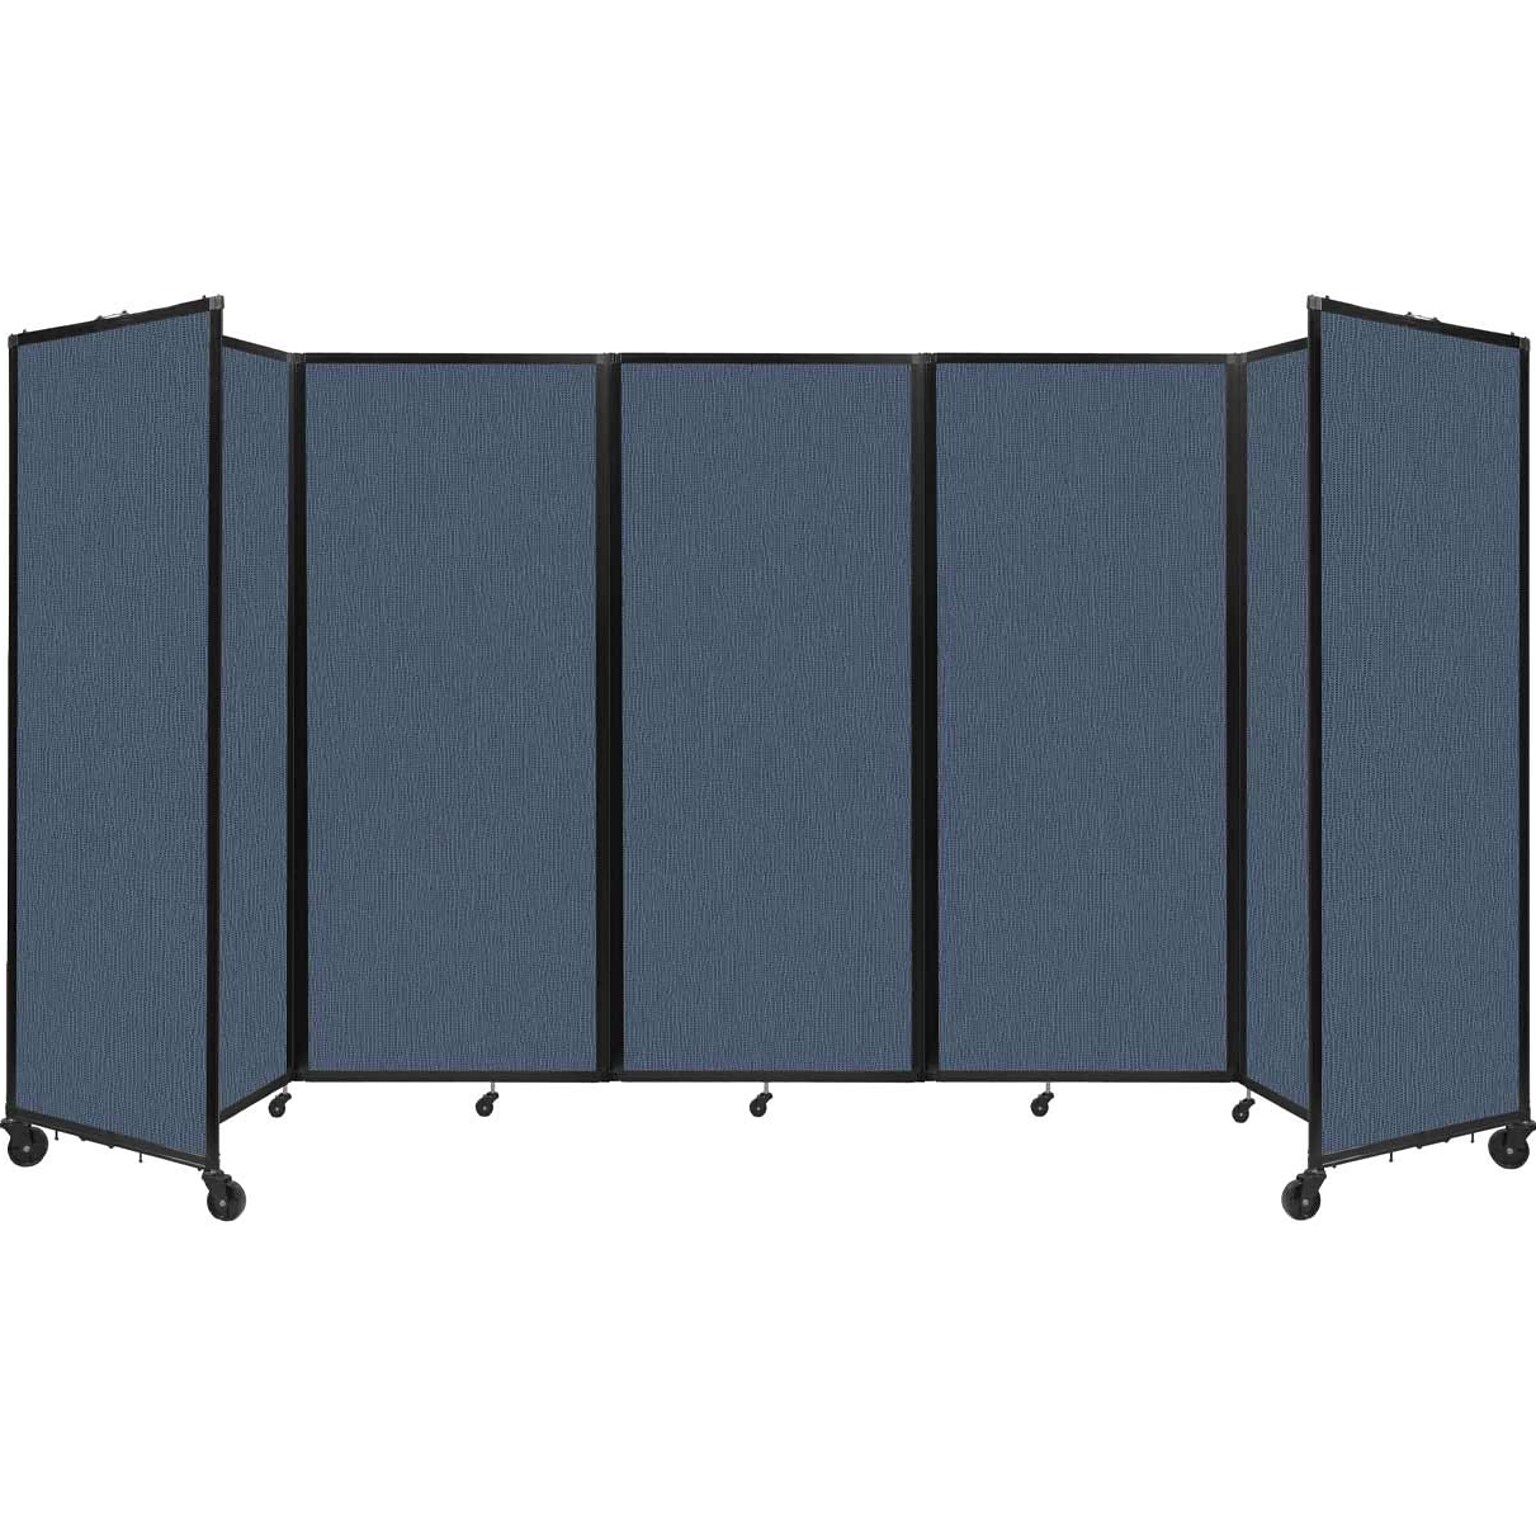 Versare The Room Divider 360 Freestanding Folding Portable Partition, 82H x 168W, Ocean Fabric (1182515)